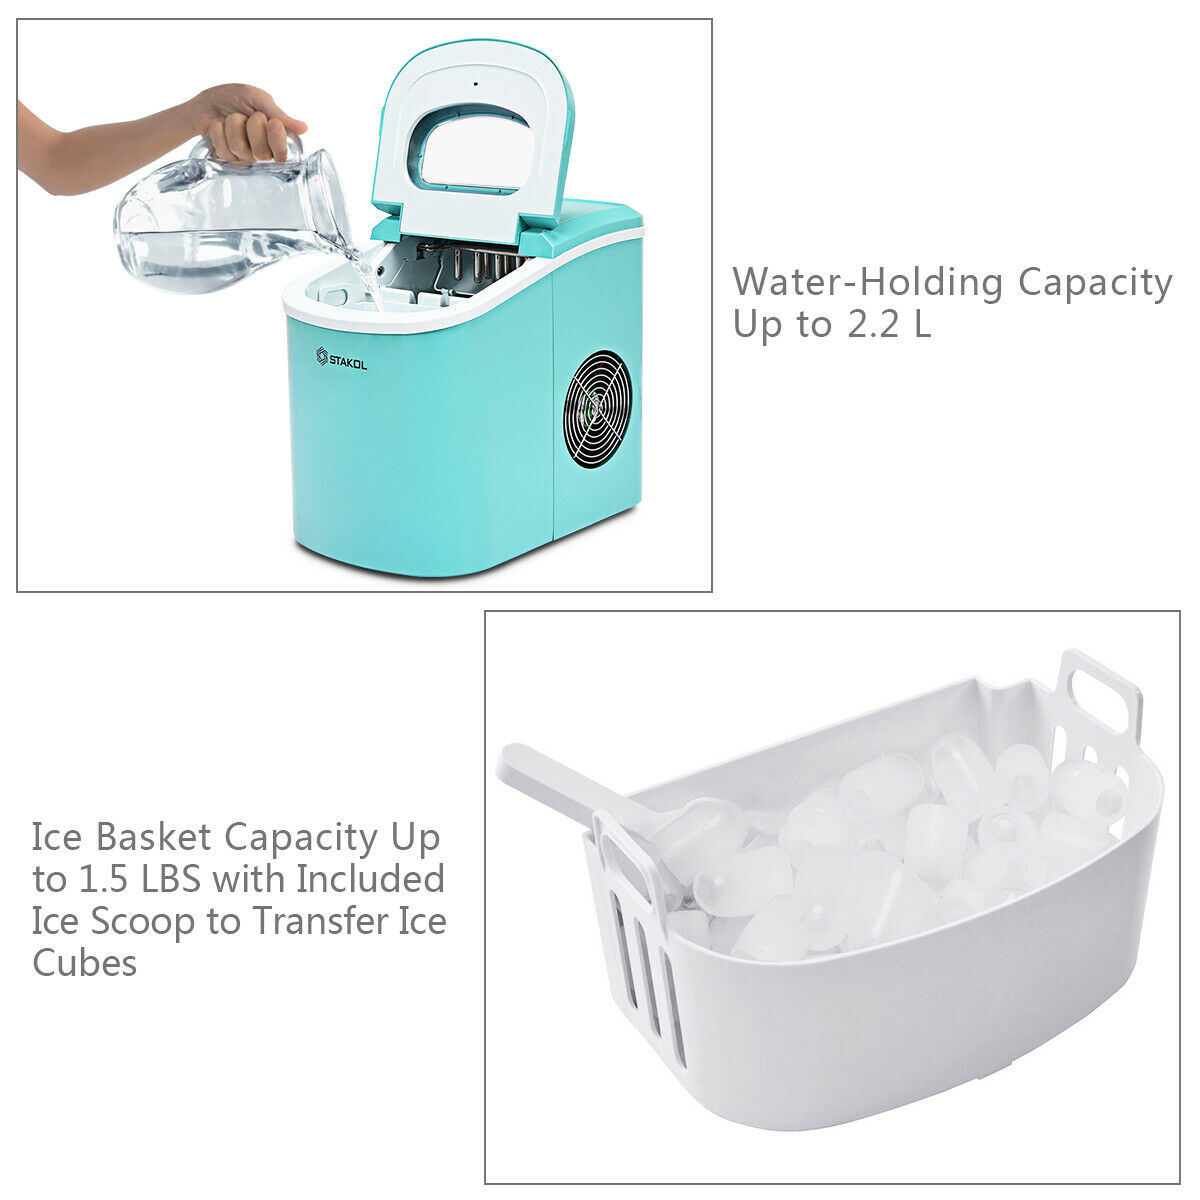 Stakol Portable Compact Electric Ice Maker Machine Mini Cube 26lb/Day Mint Green - image 2 of 10